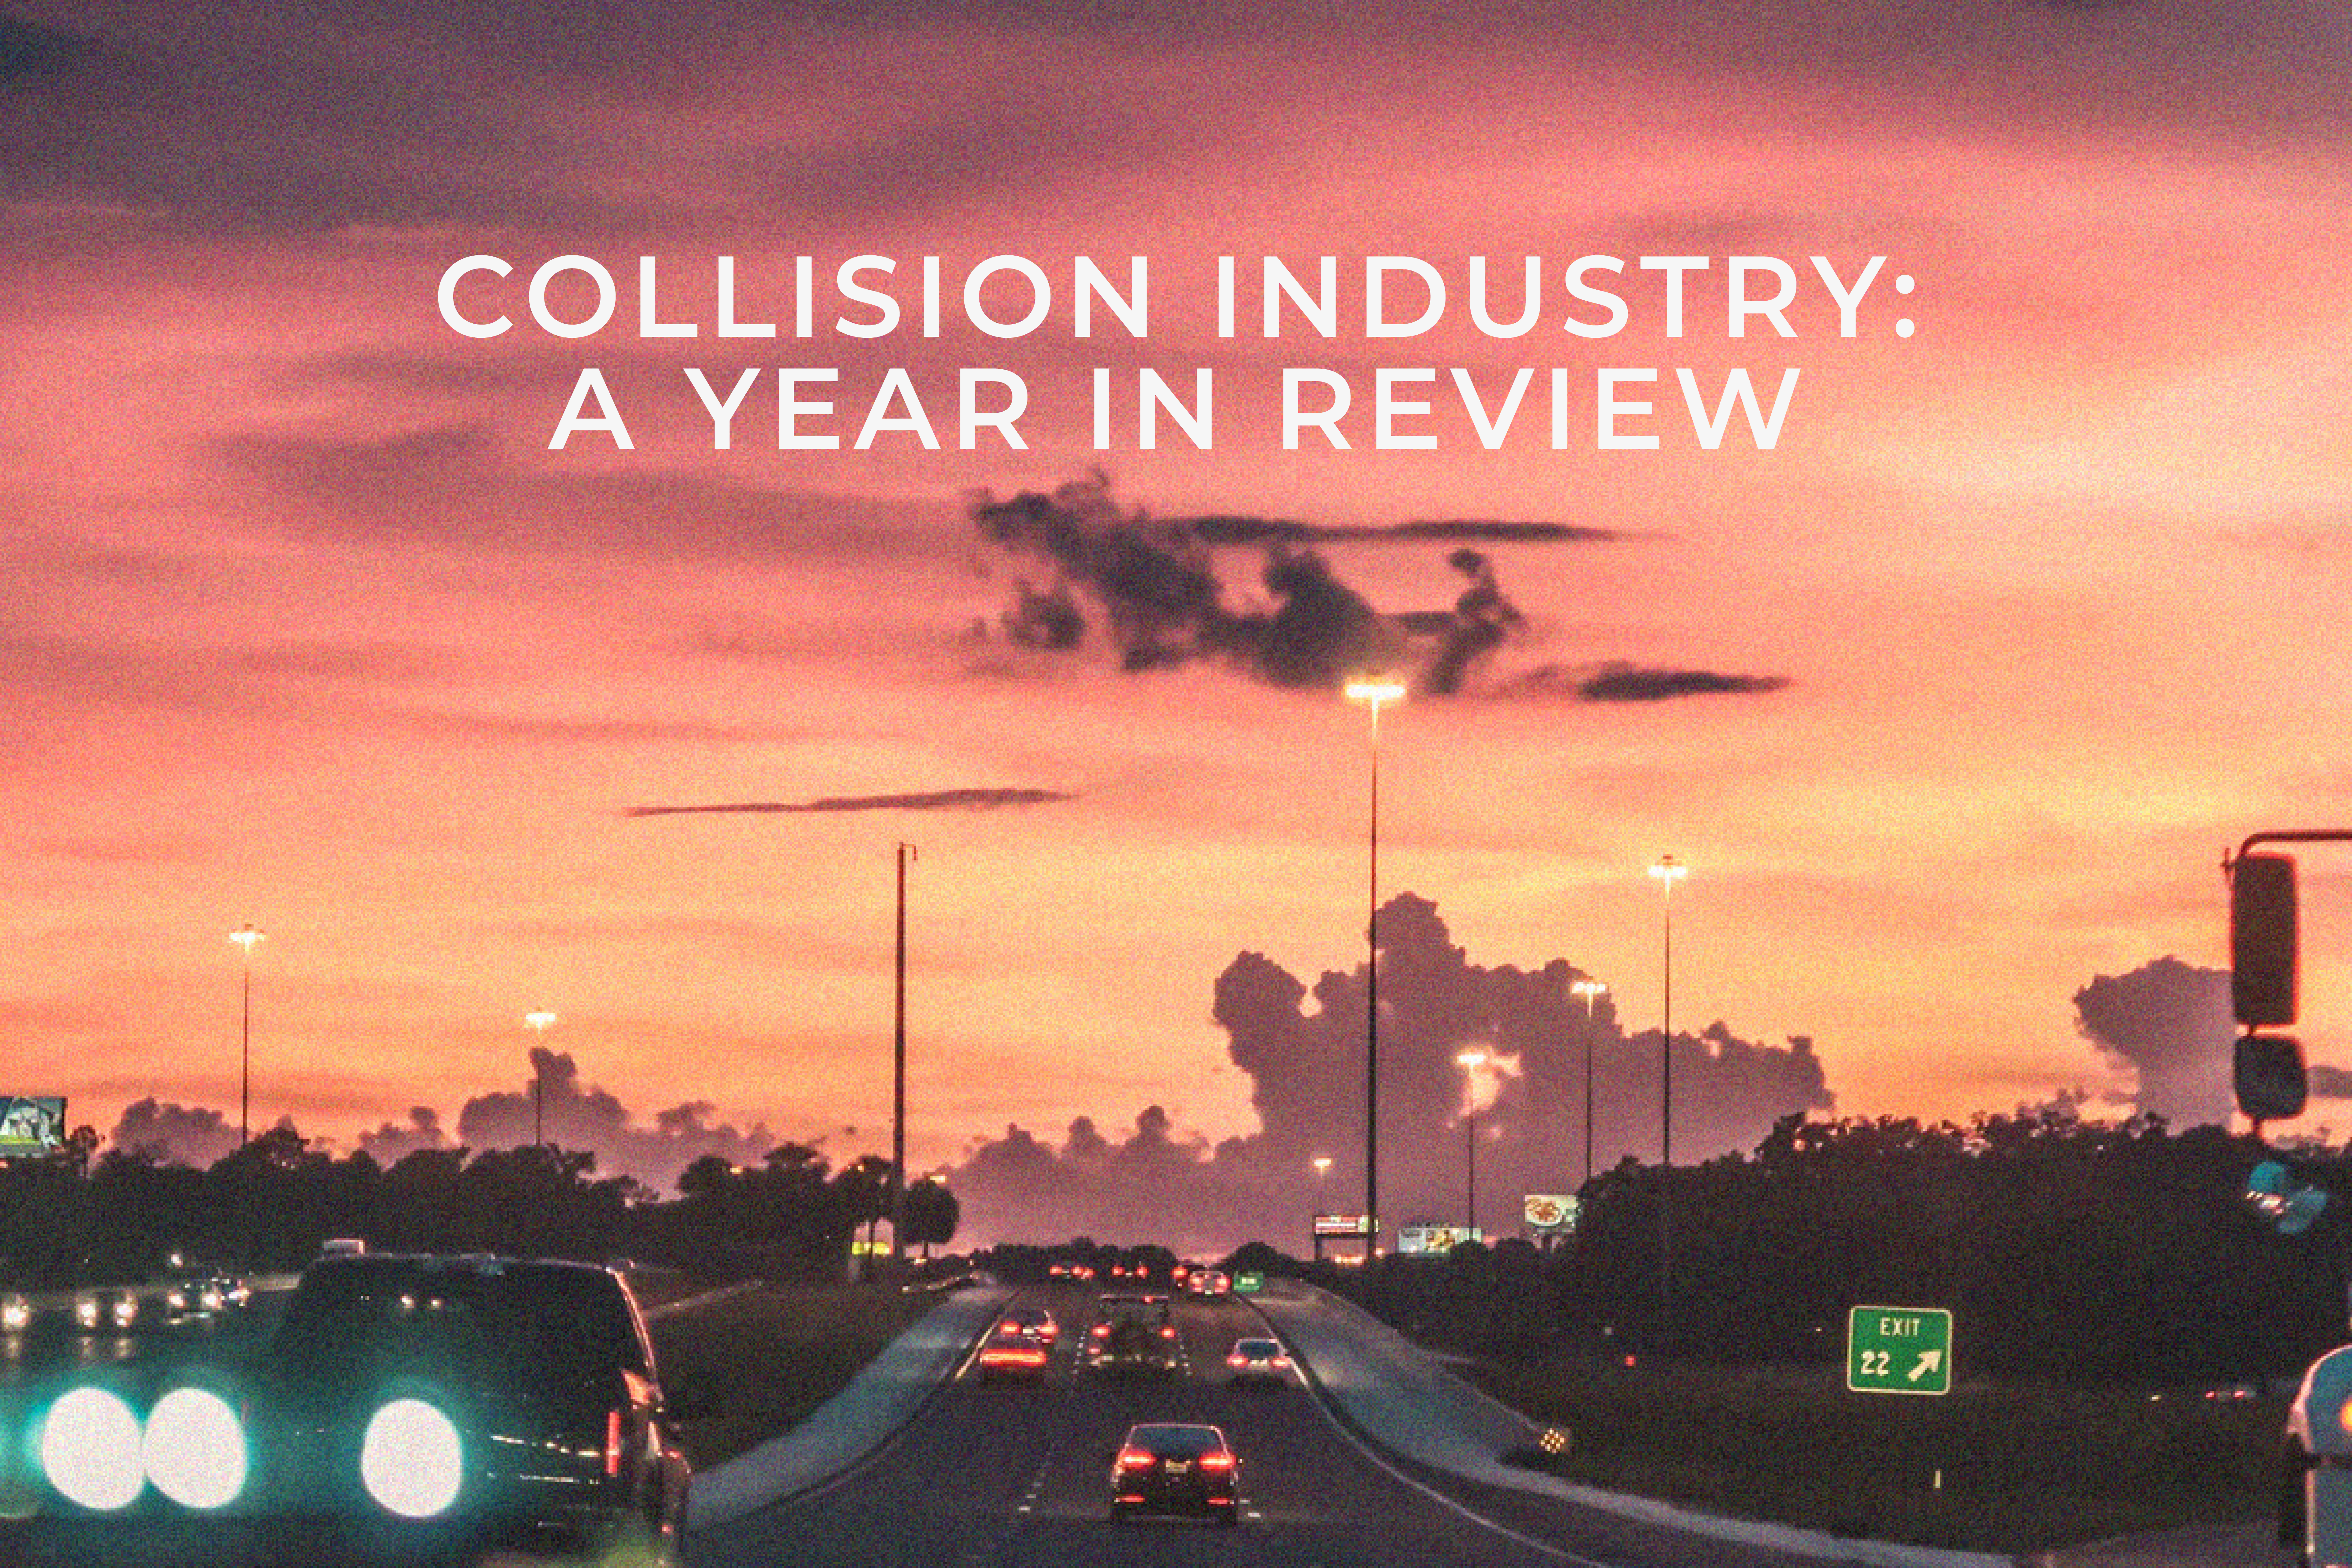 As the year has drawn to an end, we look to see what trends in the collision industry to watch to help guide our businesses as we start a new year.